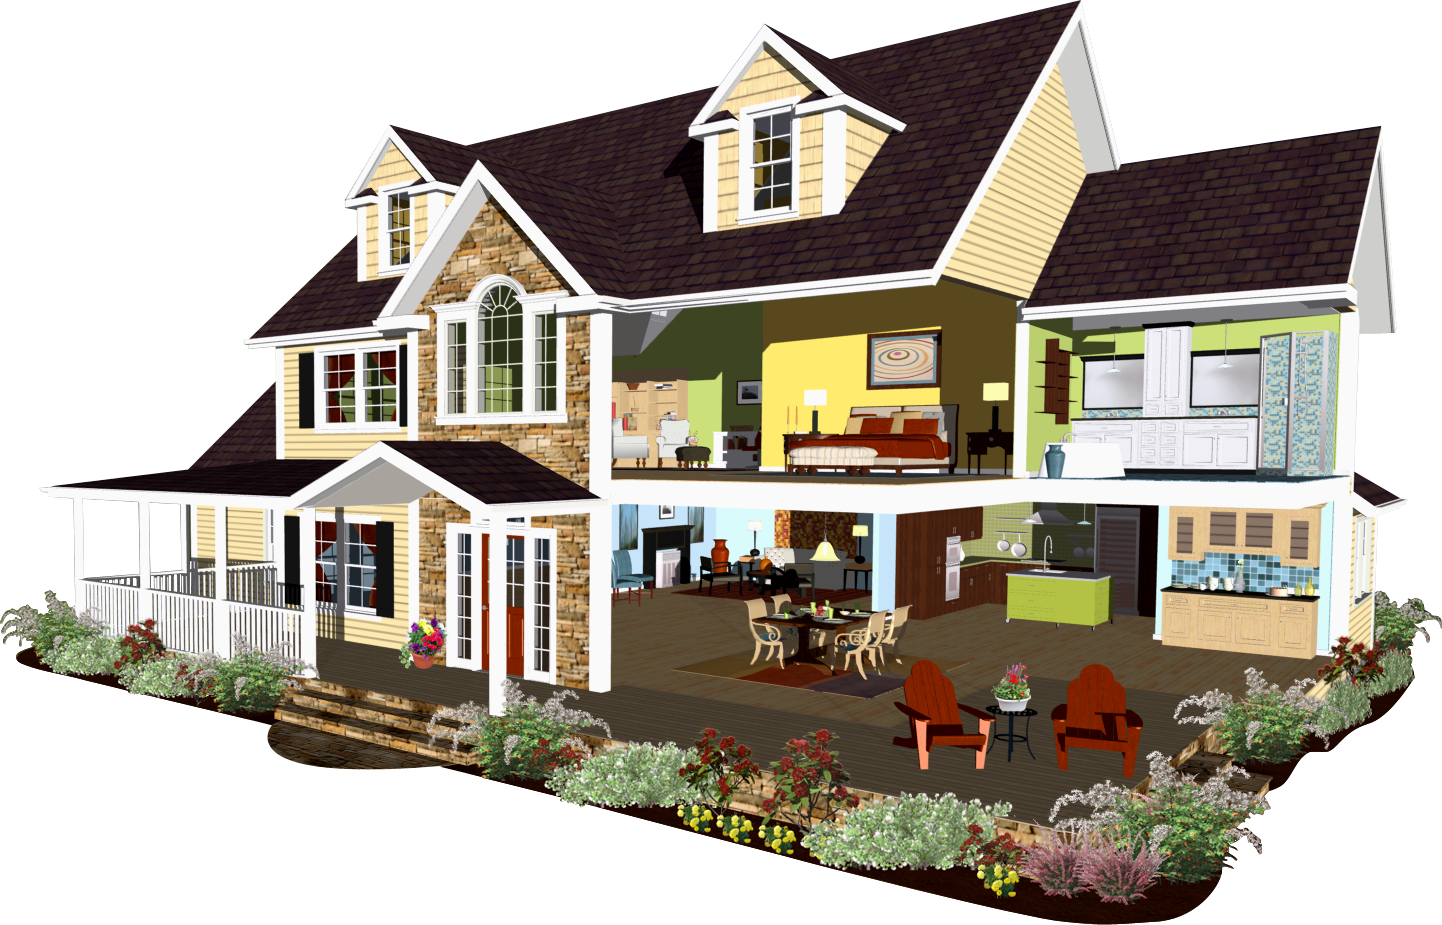 Design Your Own Virtual House